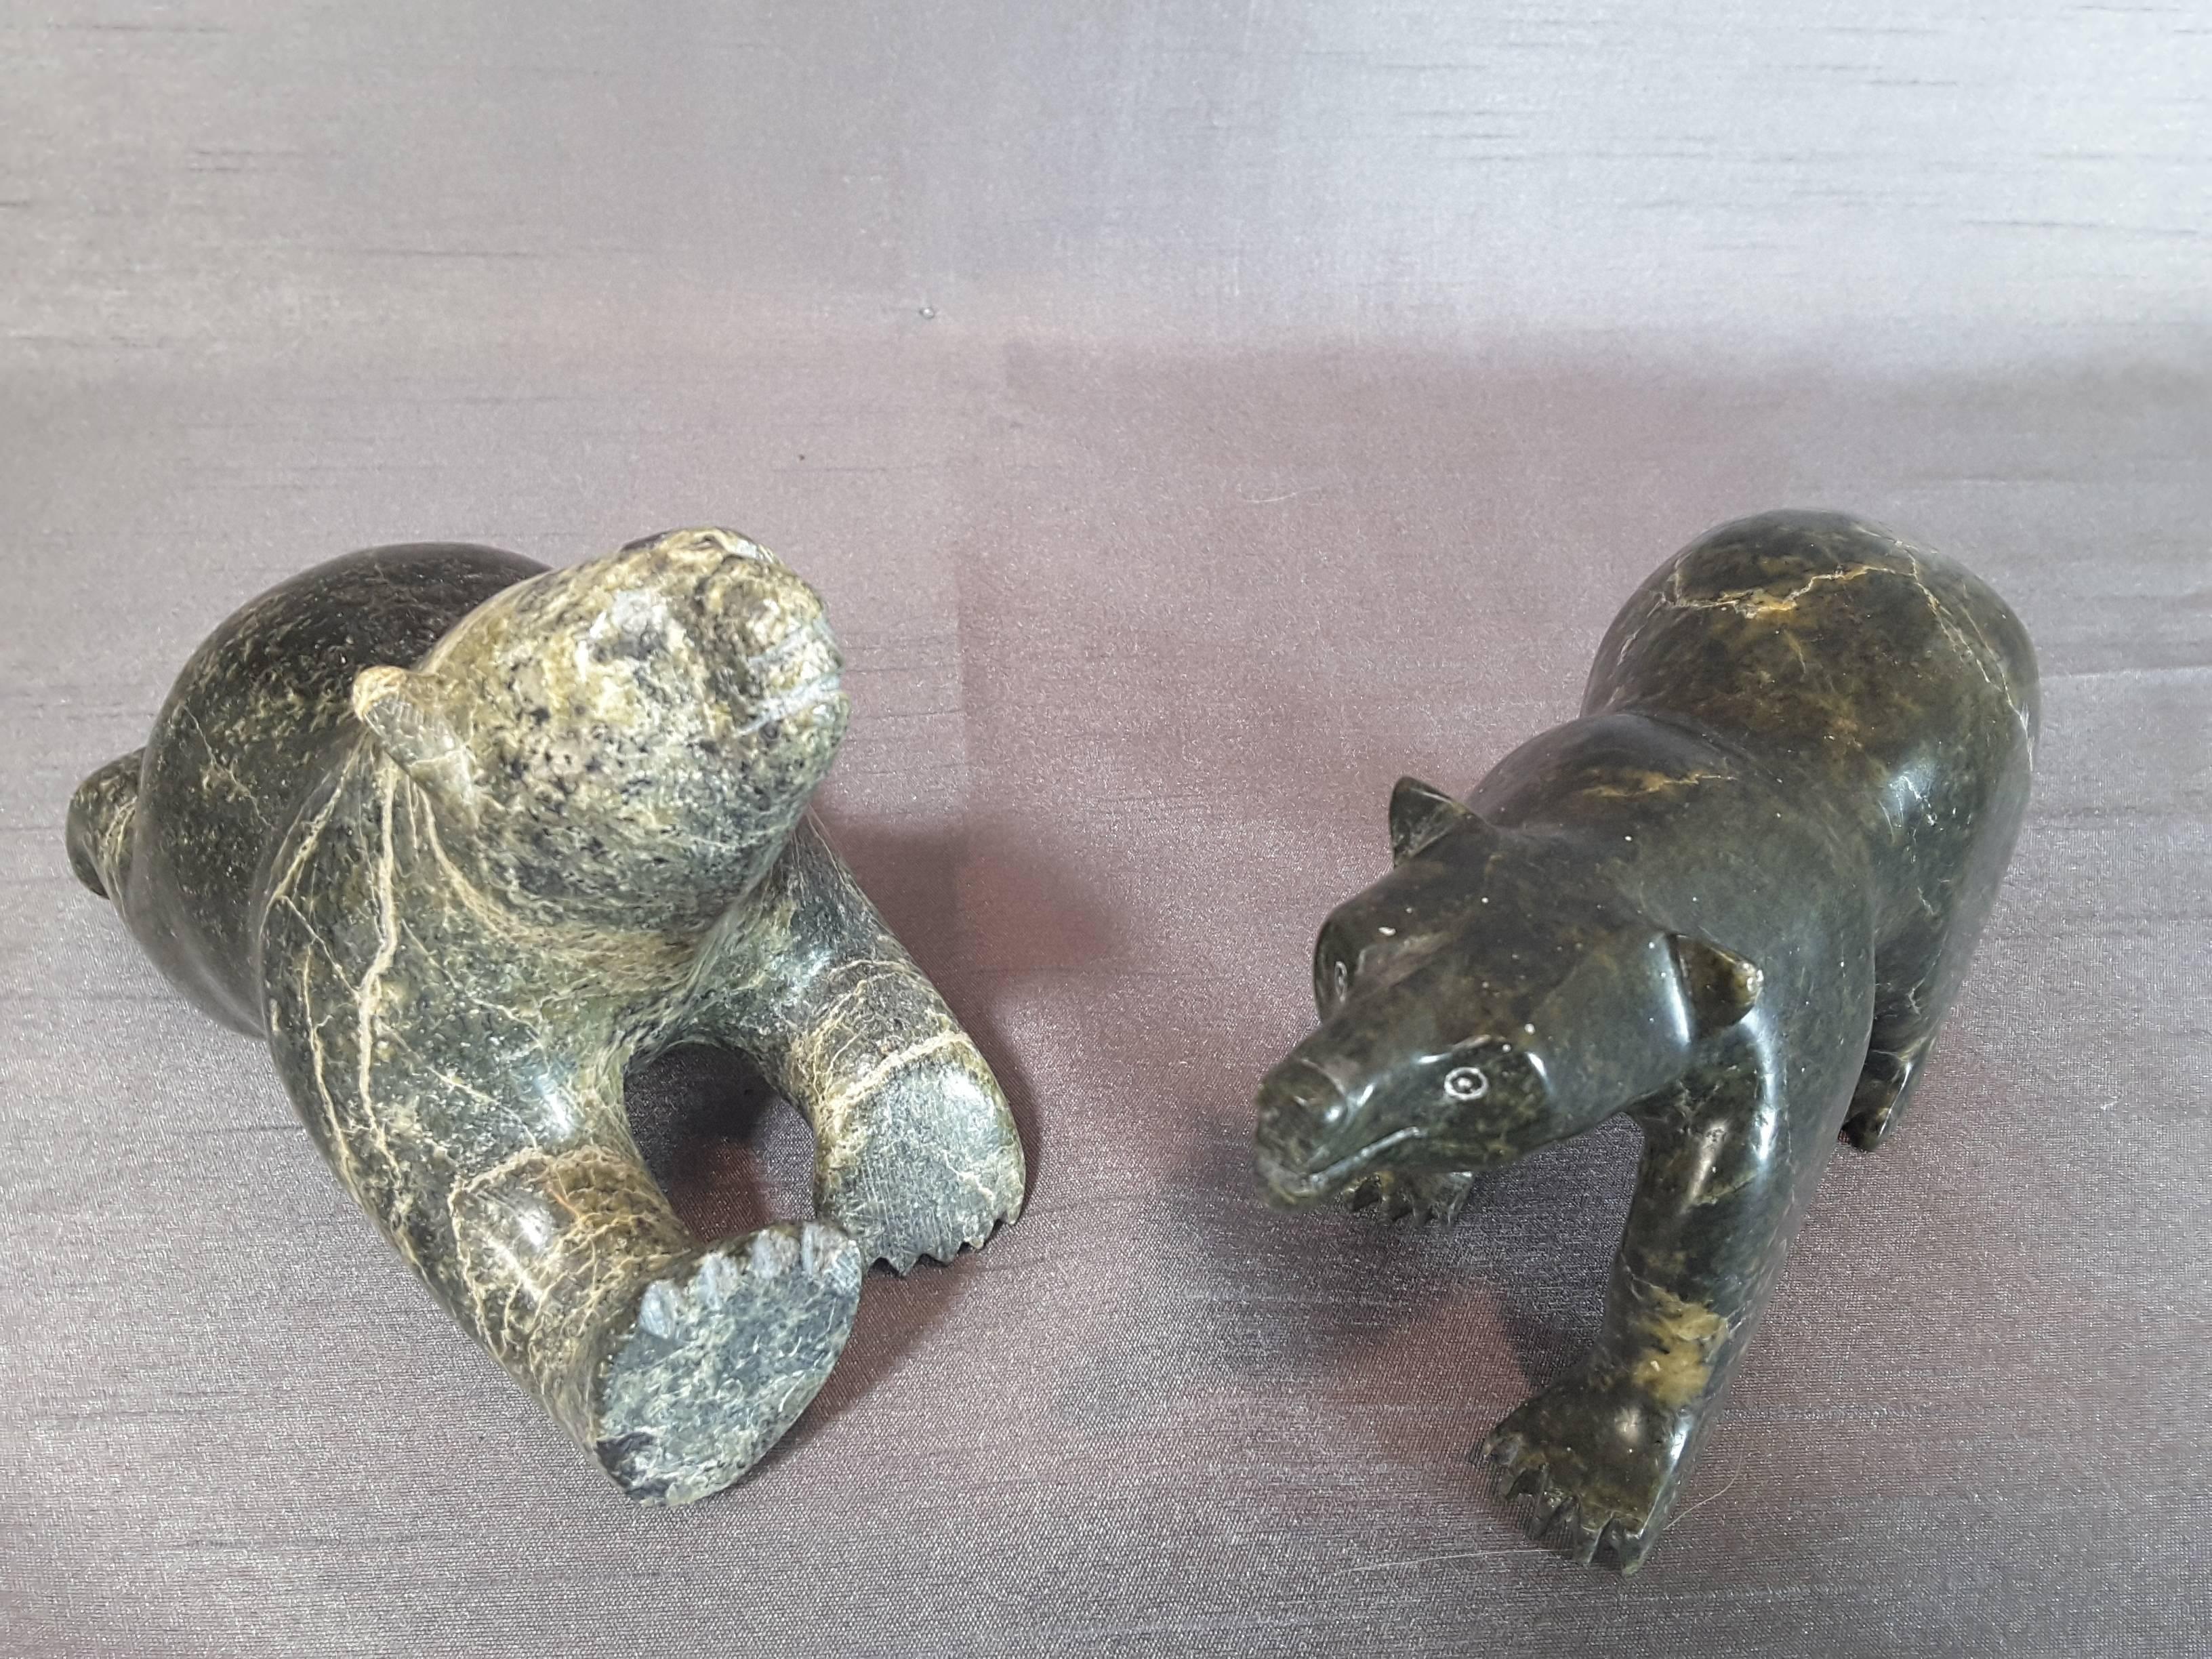 Pair of Inuit soapstone bear sculptures, circa 1960-1970, The pair of soapstone bears consist of one bear standing and the other one in a lying position. Both are carved with green soapstone, one in a light green and the other in a darker